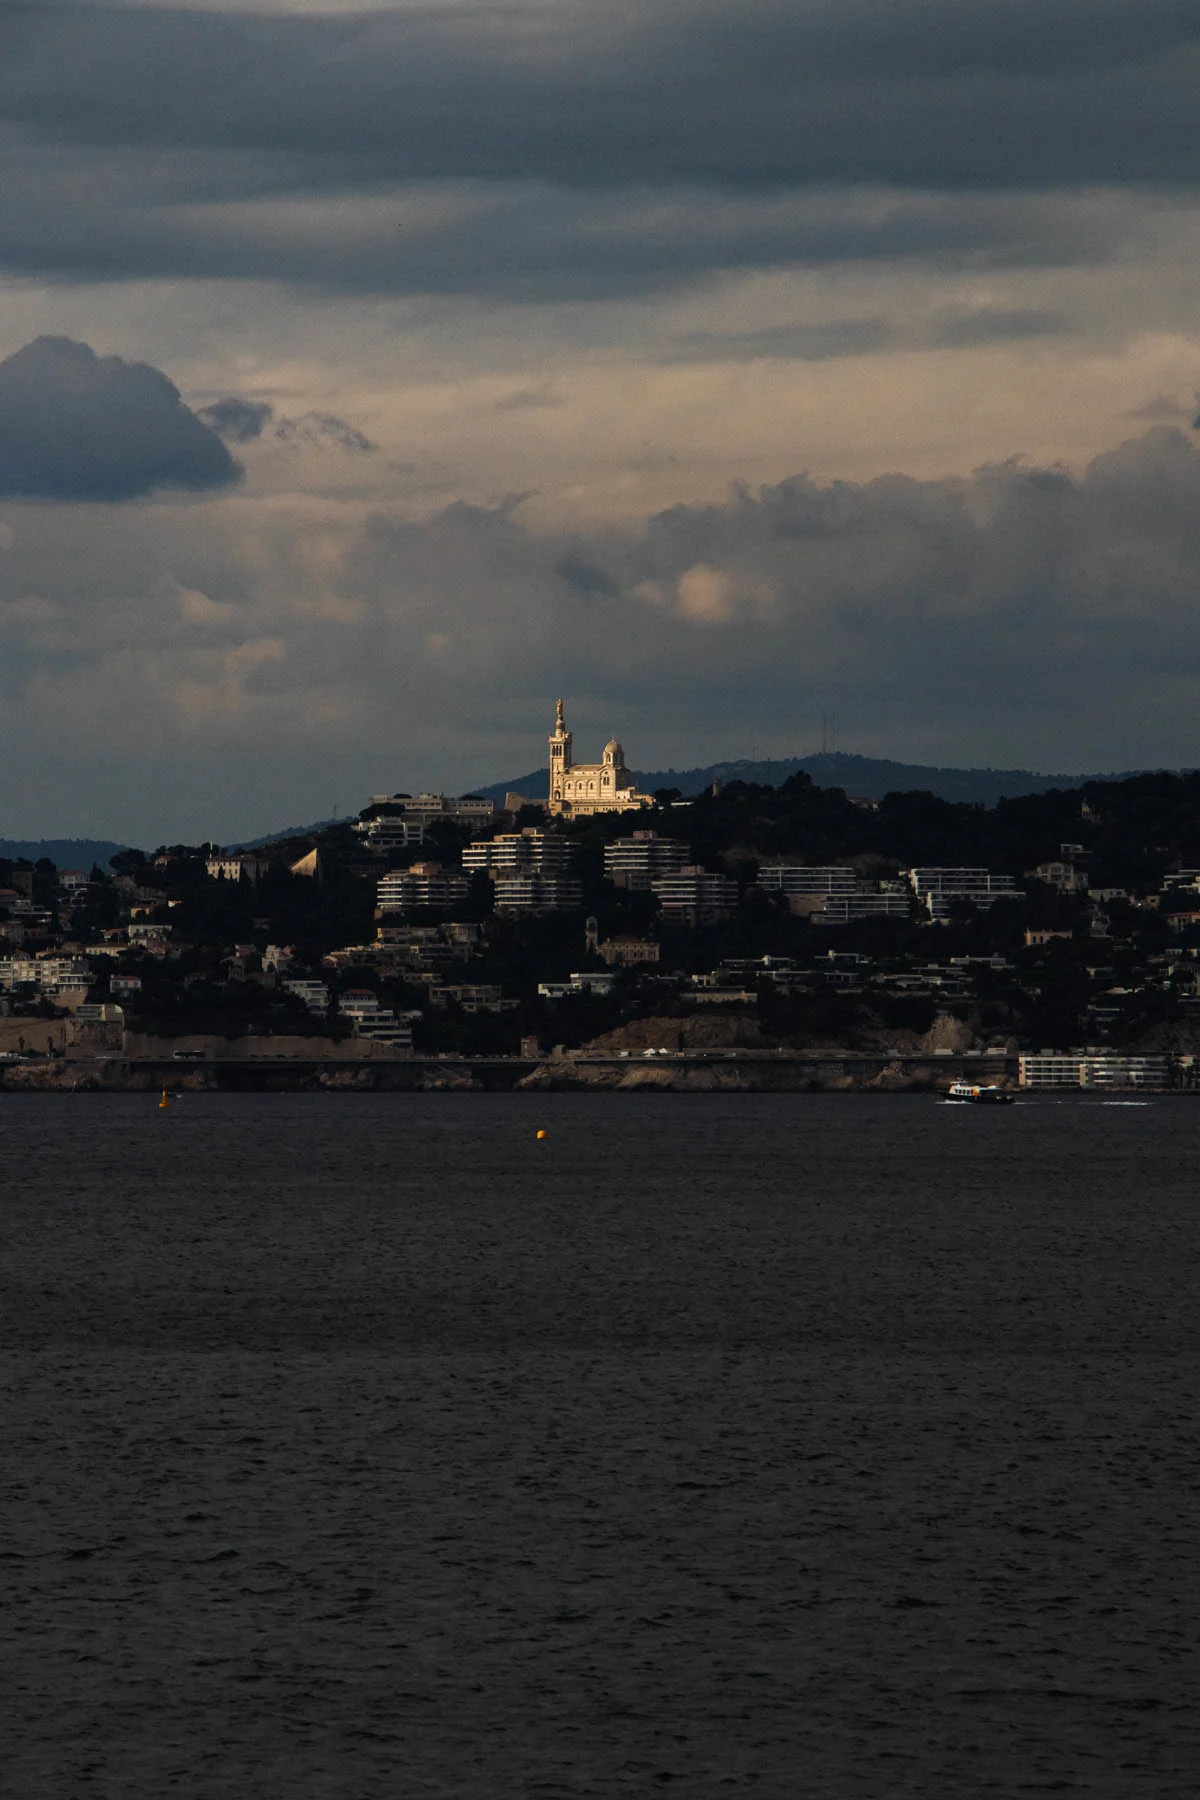 A photograph of Marseille’s Roucas Blanc hill, taken on a cloudy day facing the sea with sun lighting up the hill’s basilica